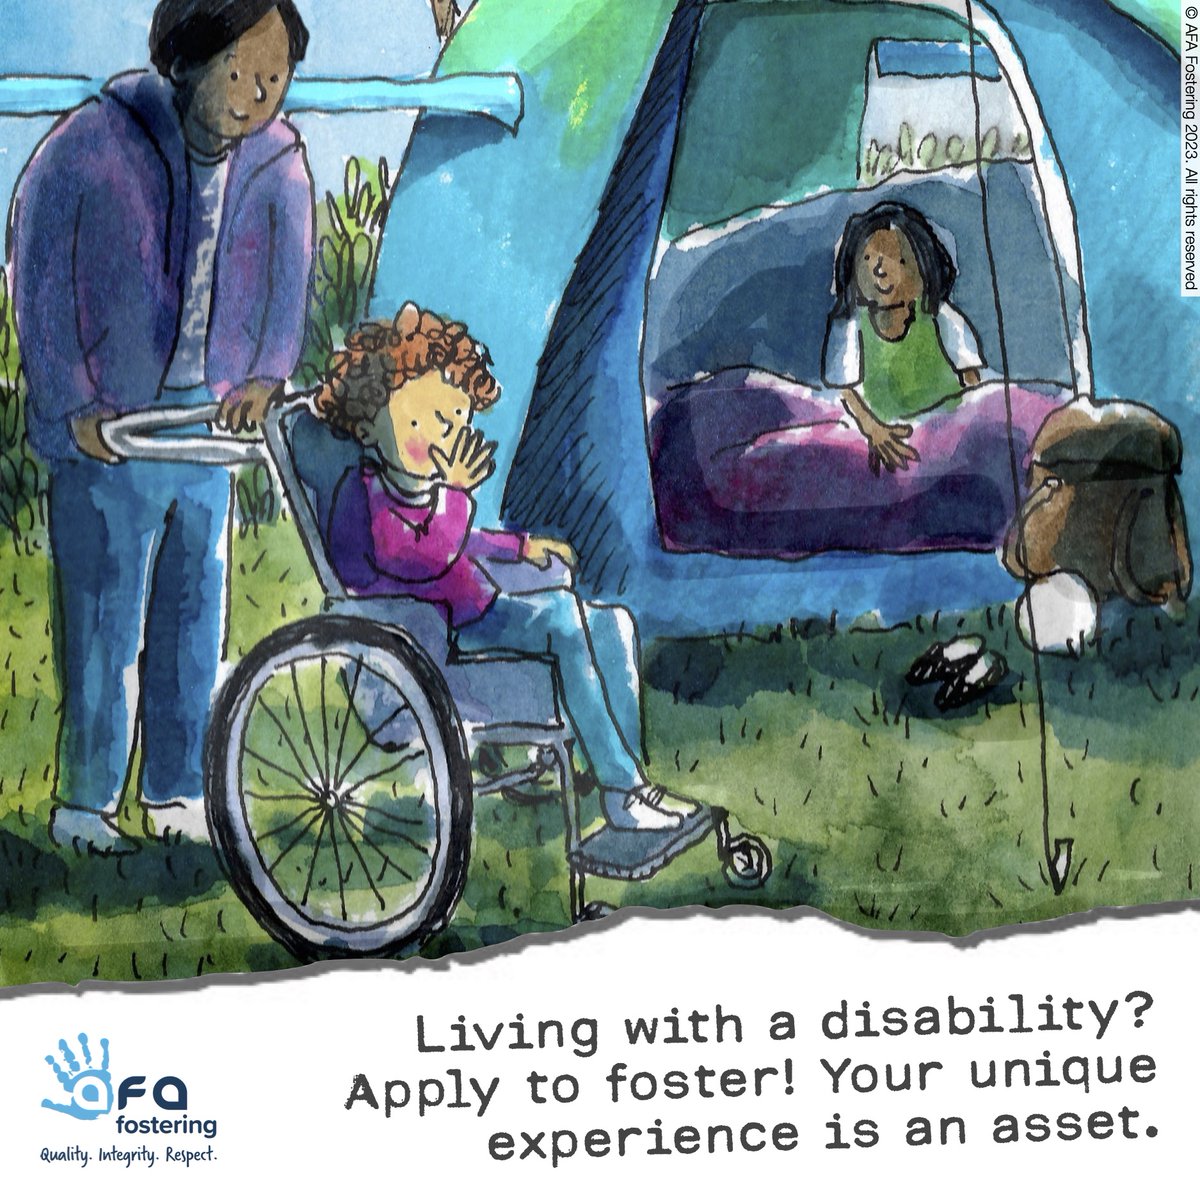 Disability doesn't deter fostering! Your unique perspective can teach children resilience and empathy. Join our diverse fostering community. Call 0333 358 3217. #InclusiveFostering #DiversePerspectives